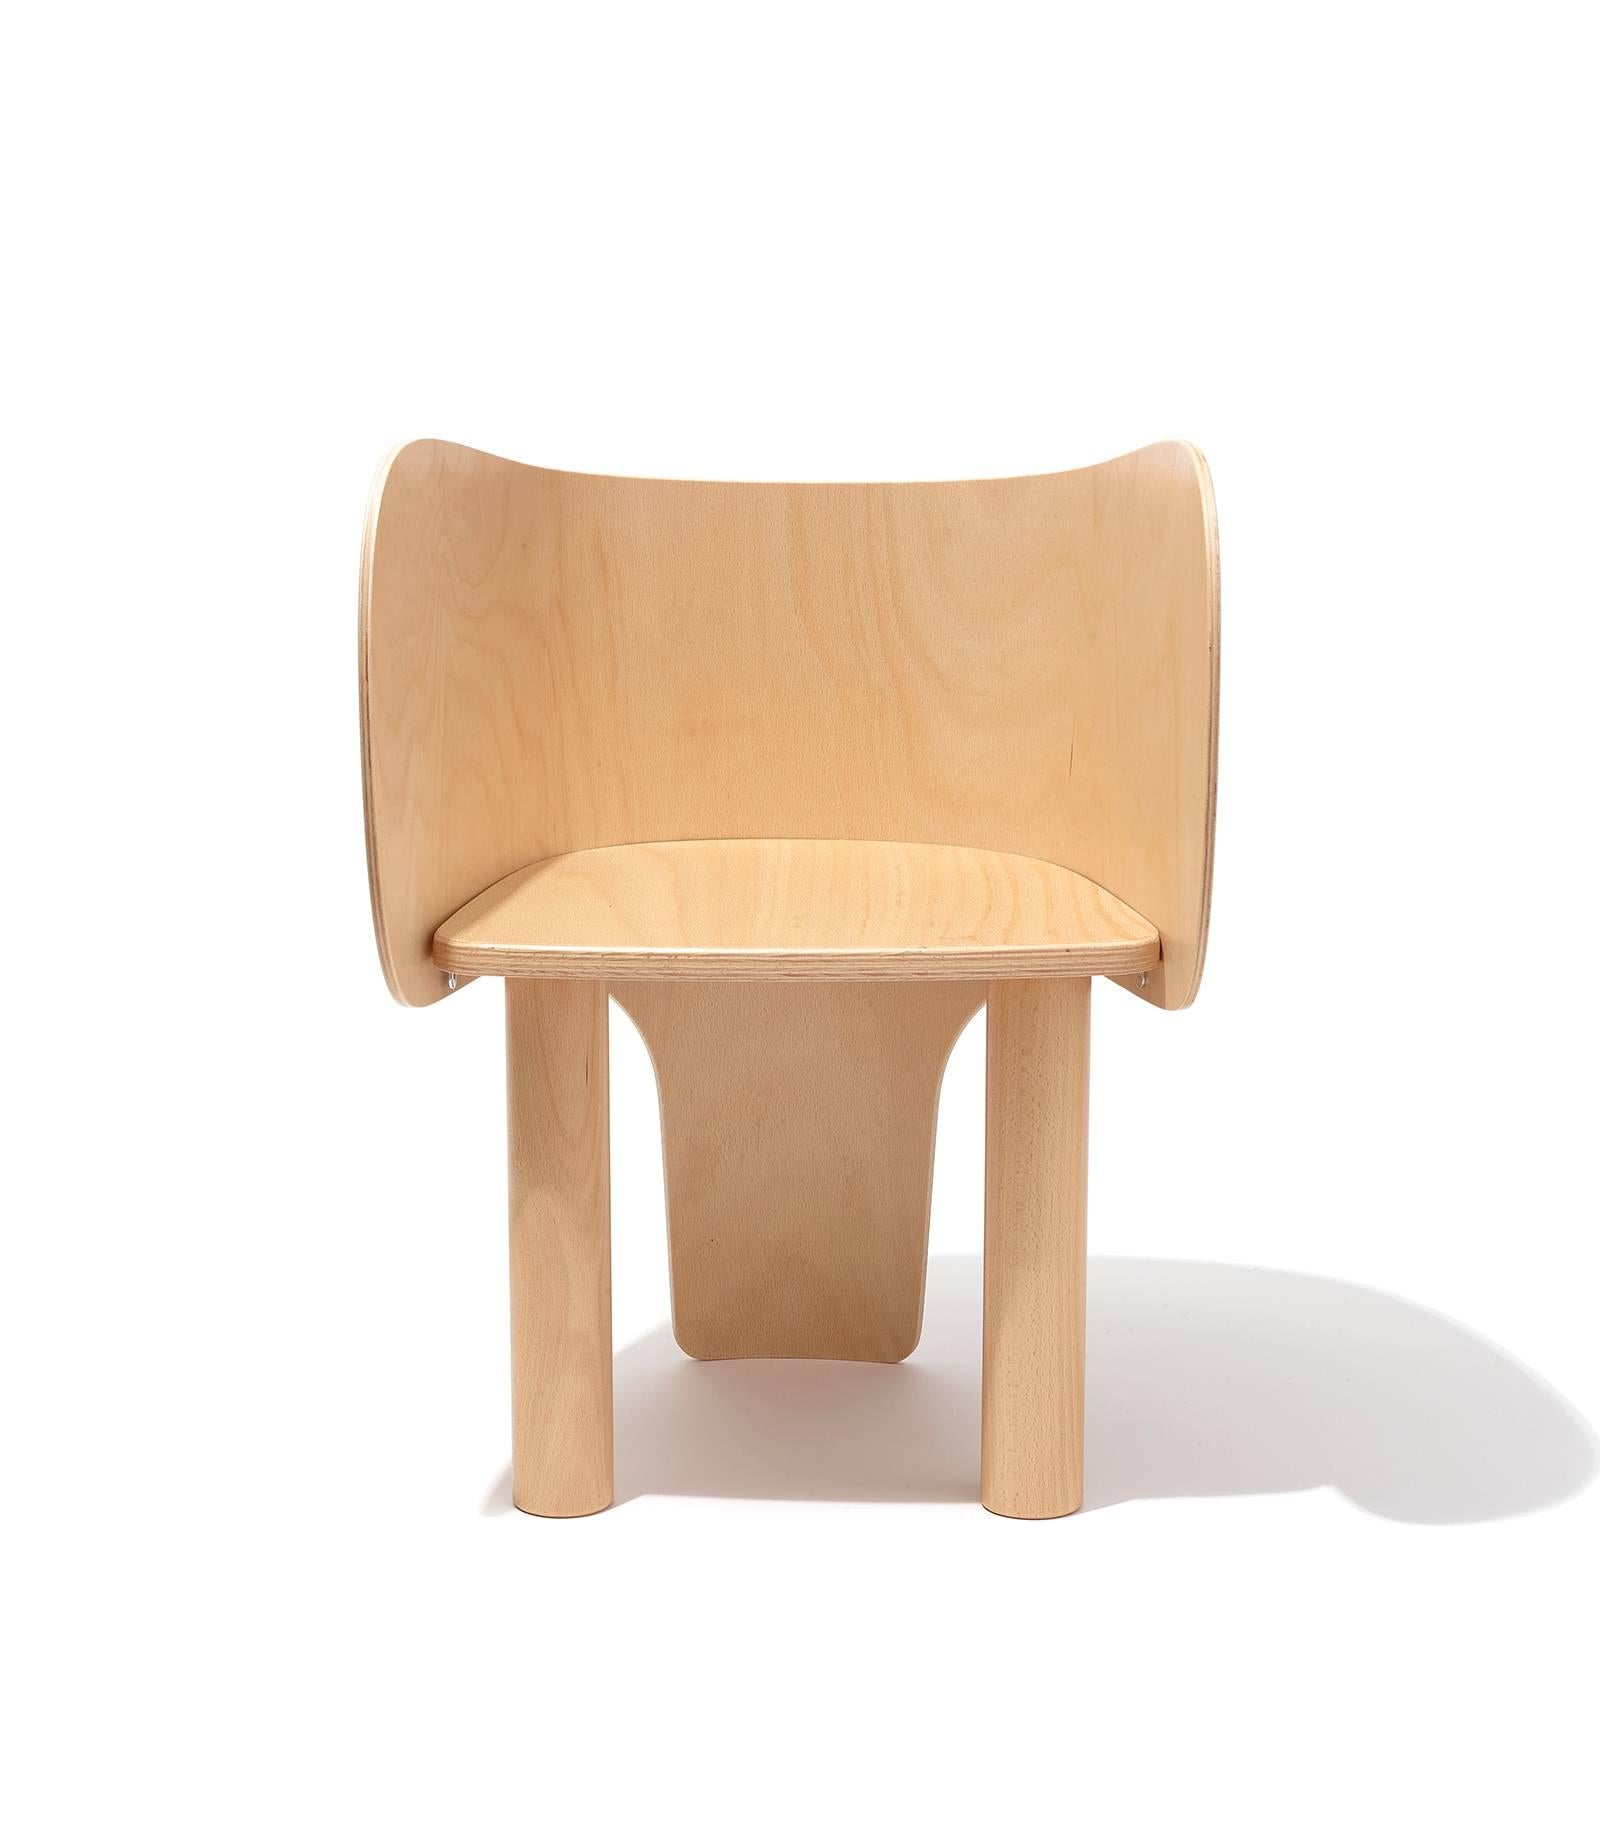 Elephant Child Chair in Beech Wood by EO

Designed by Mark Venot, France
Produced by EO
Contemporary, Denmark, 2016
European beech wood in a matte lacquer finish
H 20.5 in, W 16.5 in, D 14.5 in (seat: H 12.5 in)

Lead time 10-12 weeks

Elephant